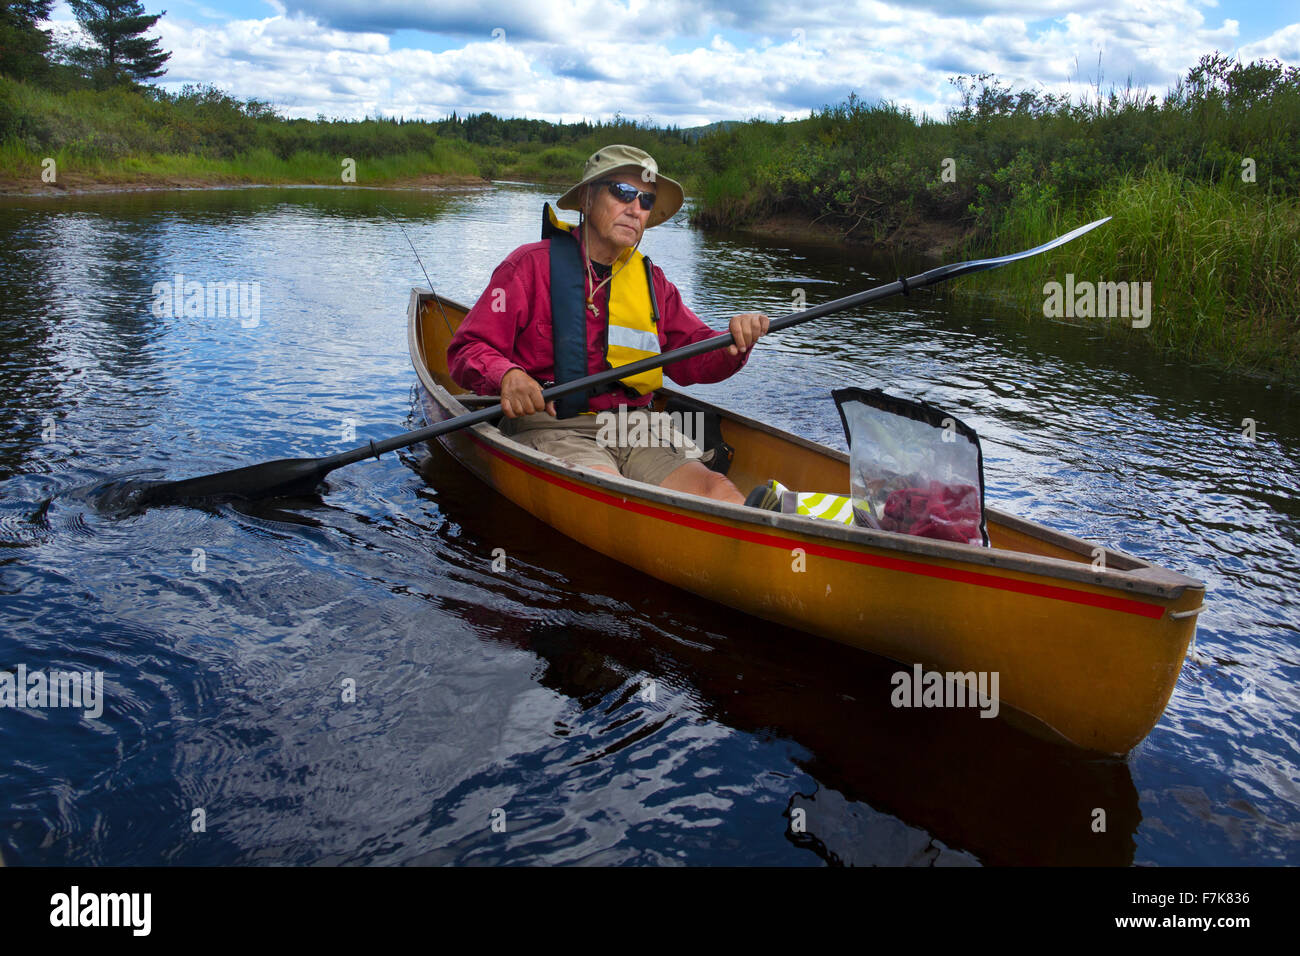 Senior man in an outdoor activity, paddling a small canoe with a kayak paddle on the Moose River near Old Forge, New York. Stock Photo